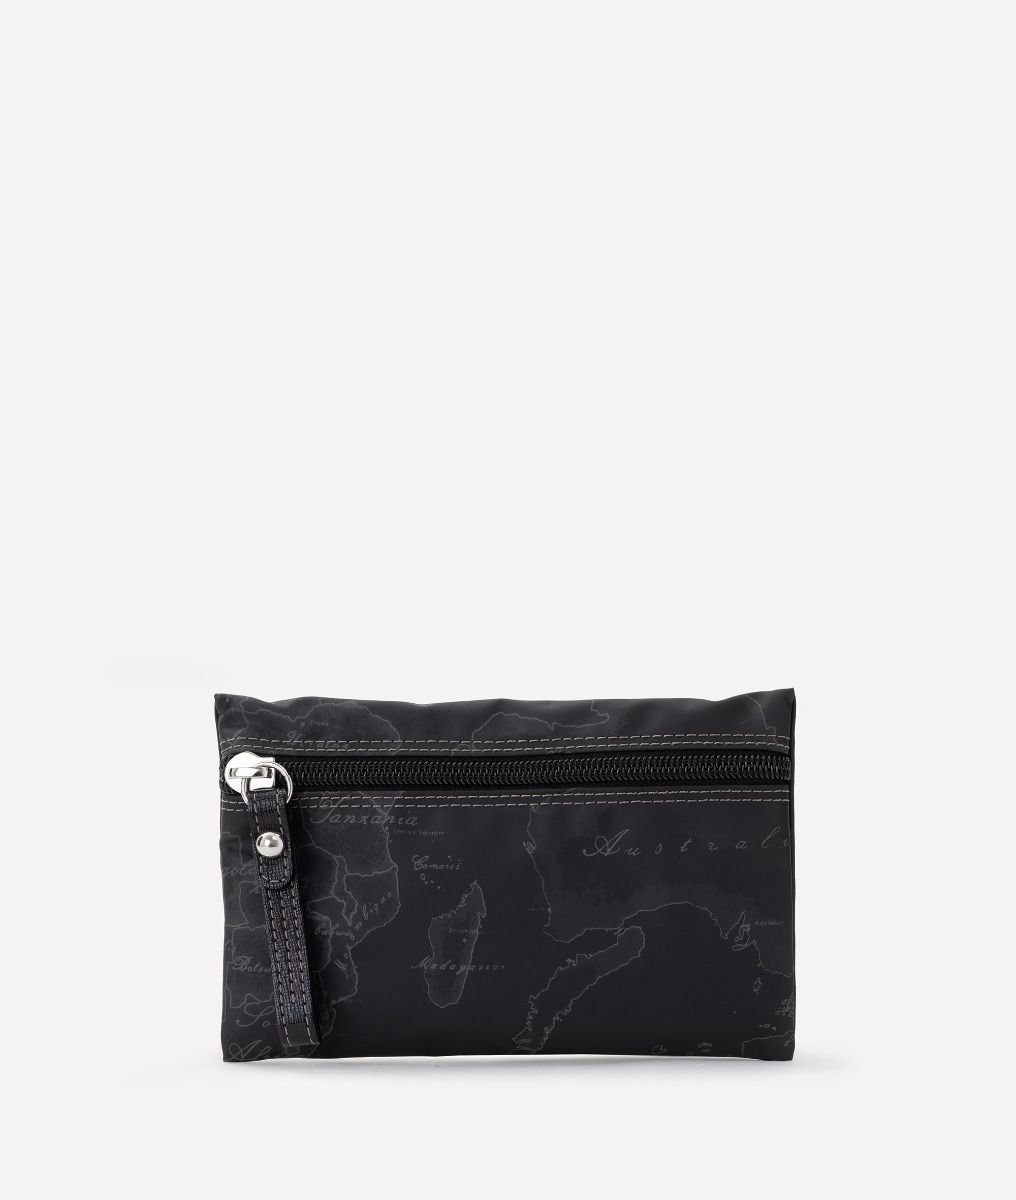 Geo Black small pochette with zip,front